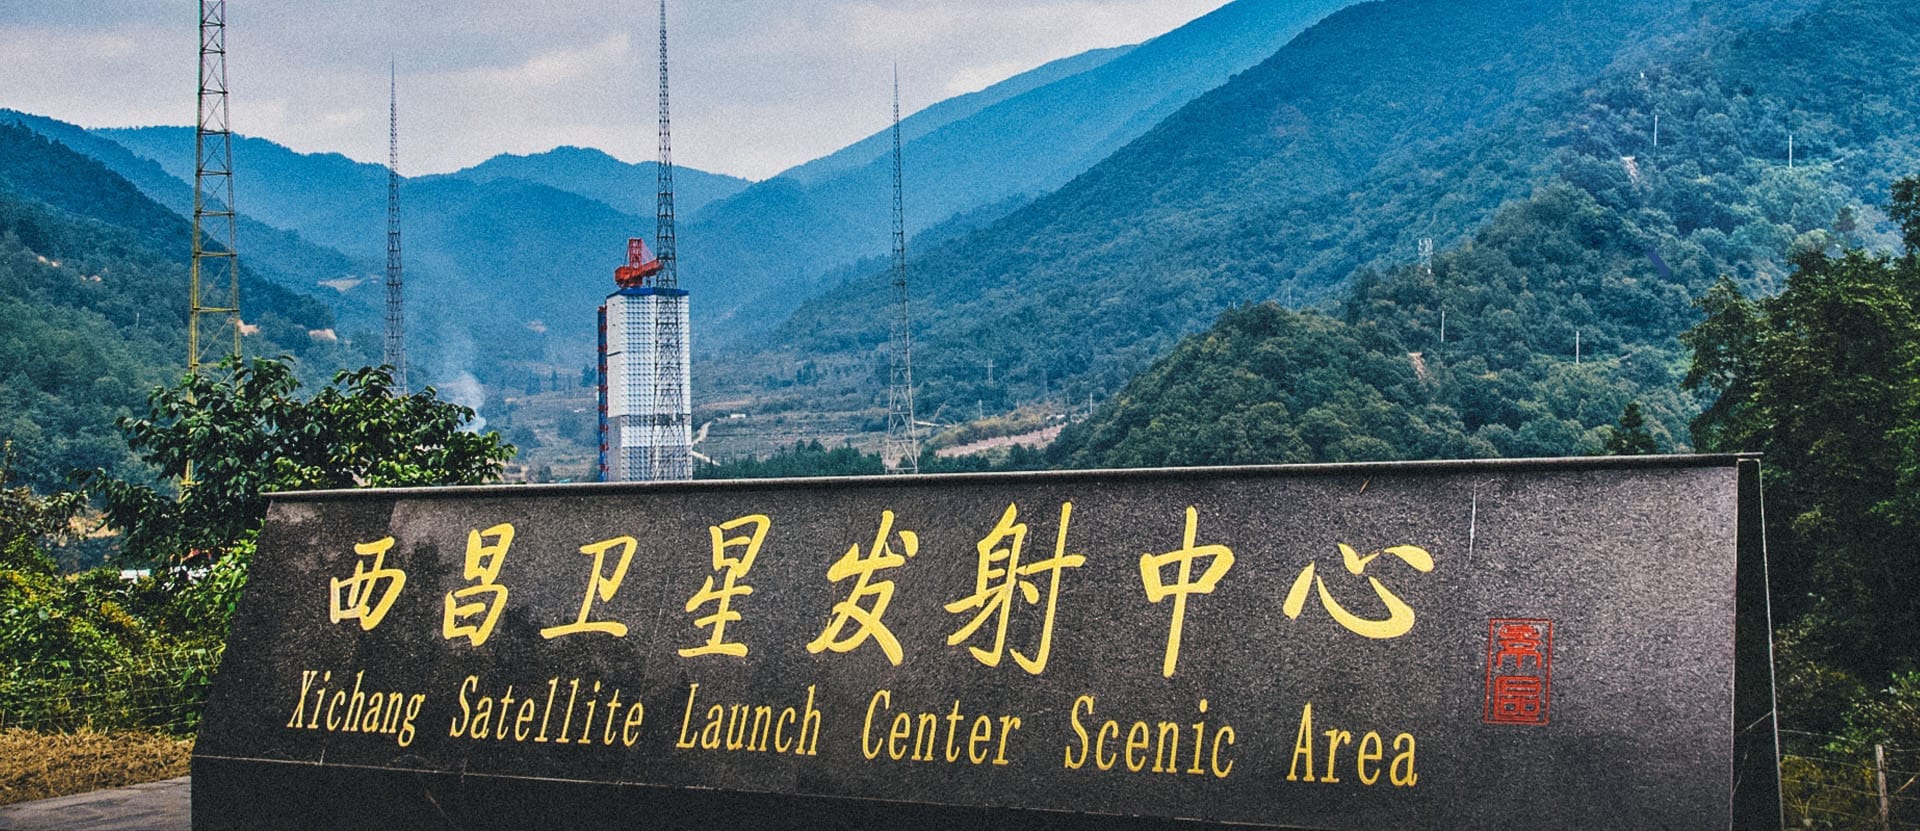 A view of the Xichang Satellite Launch Center, in southern China. ©CGTN